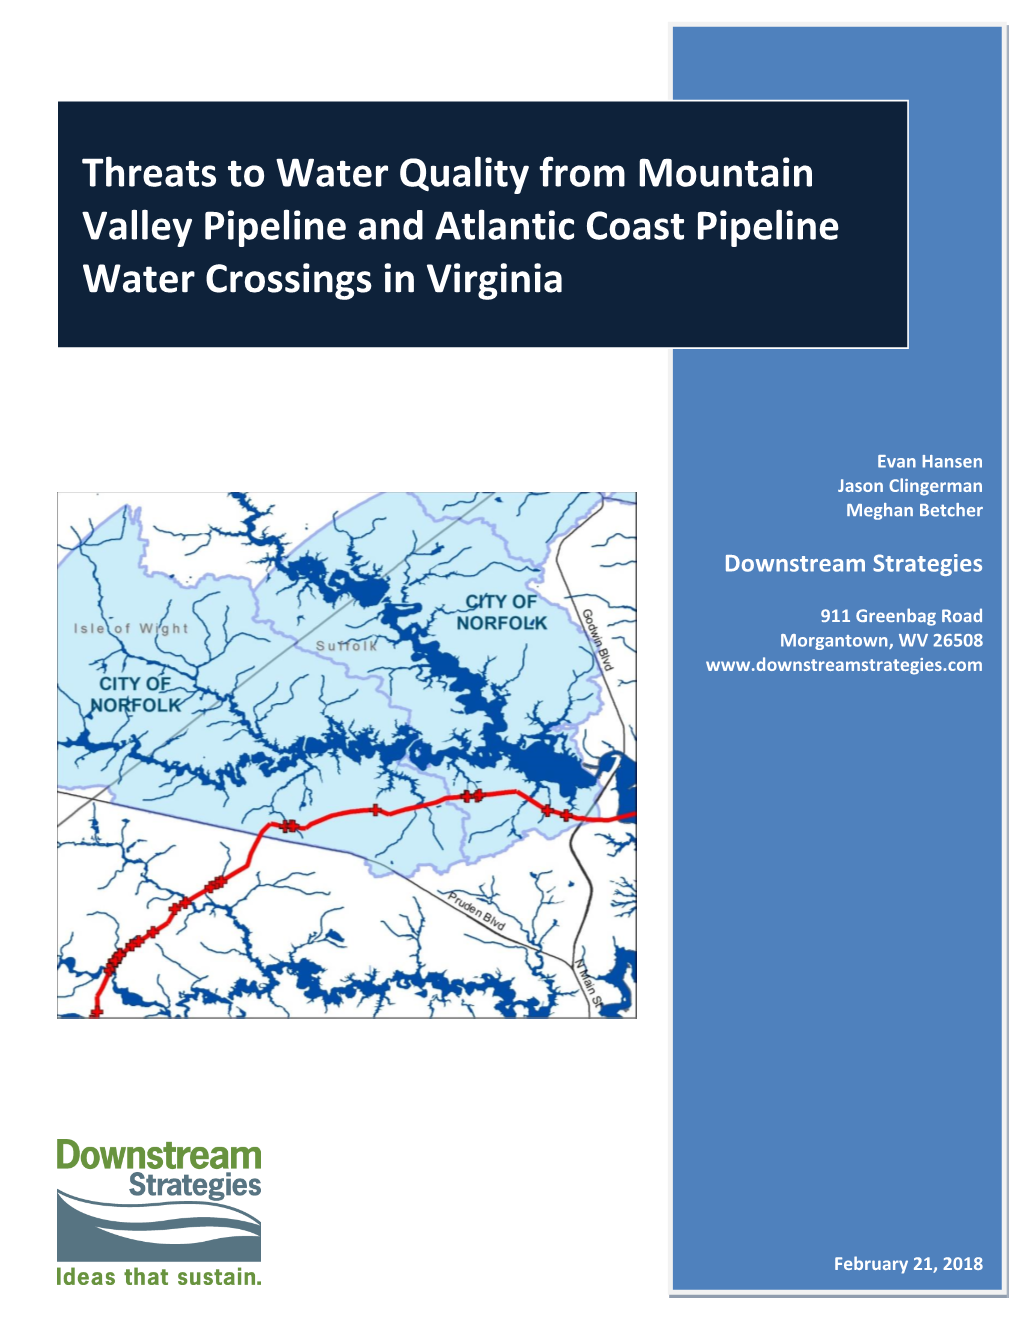 Threats to Water Quality from Mountain Valley Pipeline